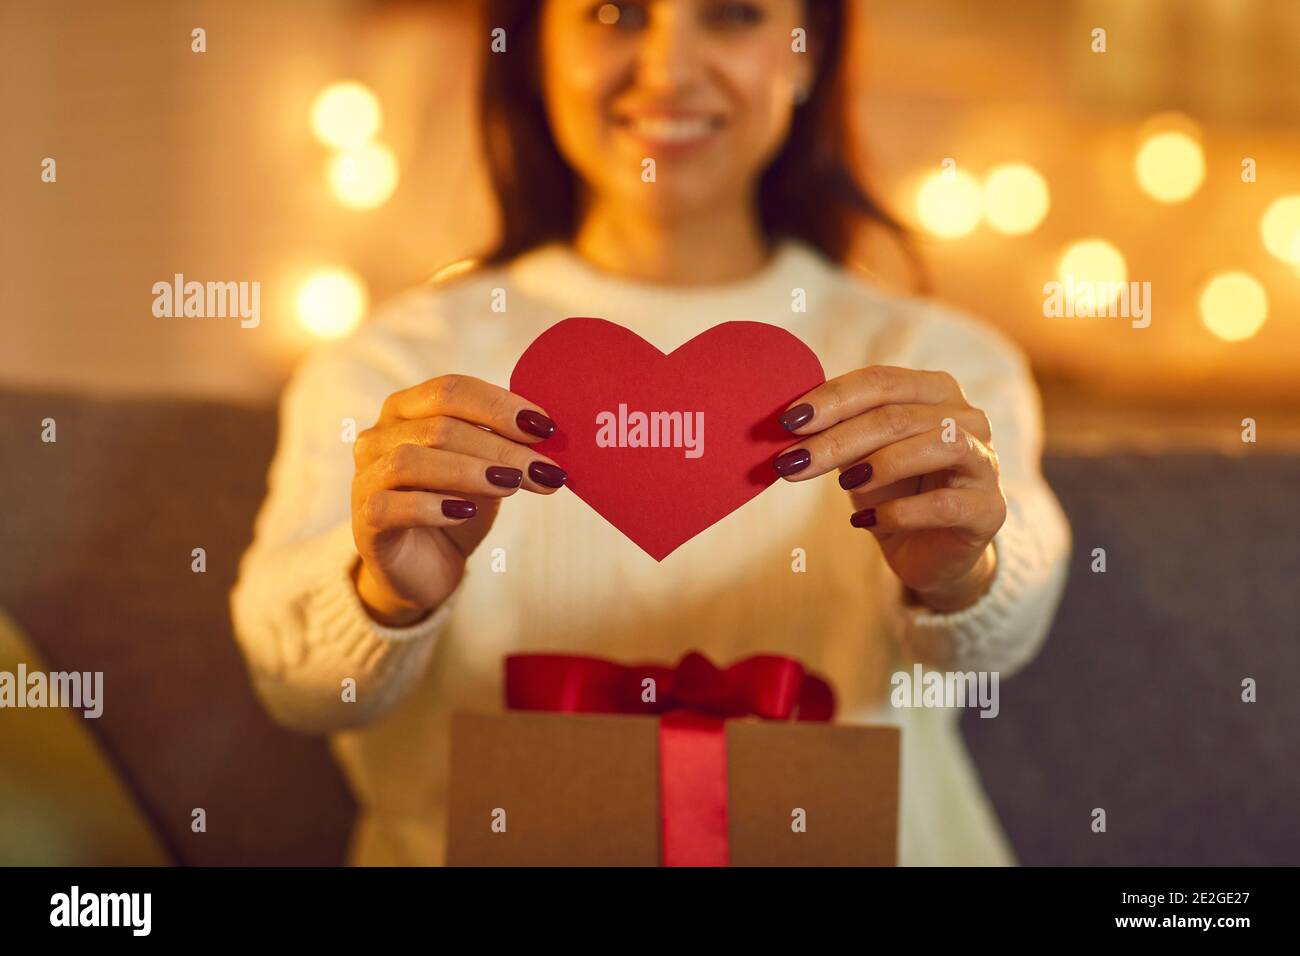 Smiling woman girlfriend showing red heart to her boyfriend during online dating Stock Photo